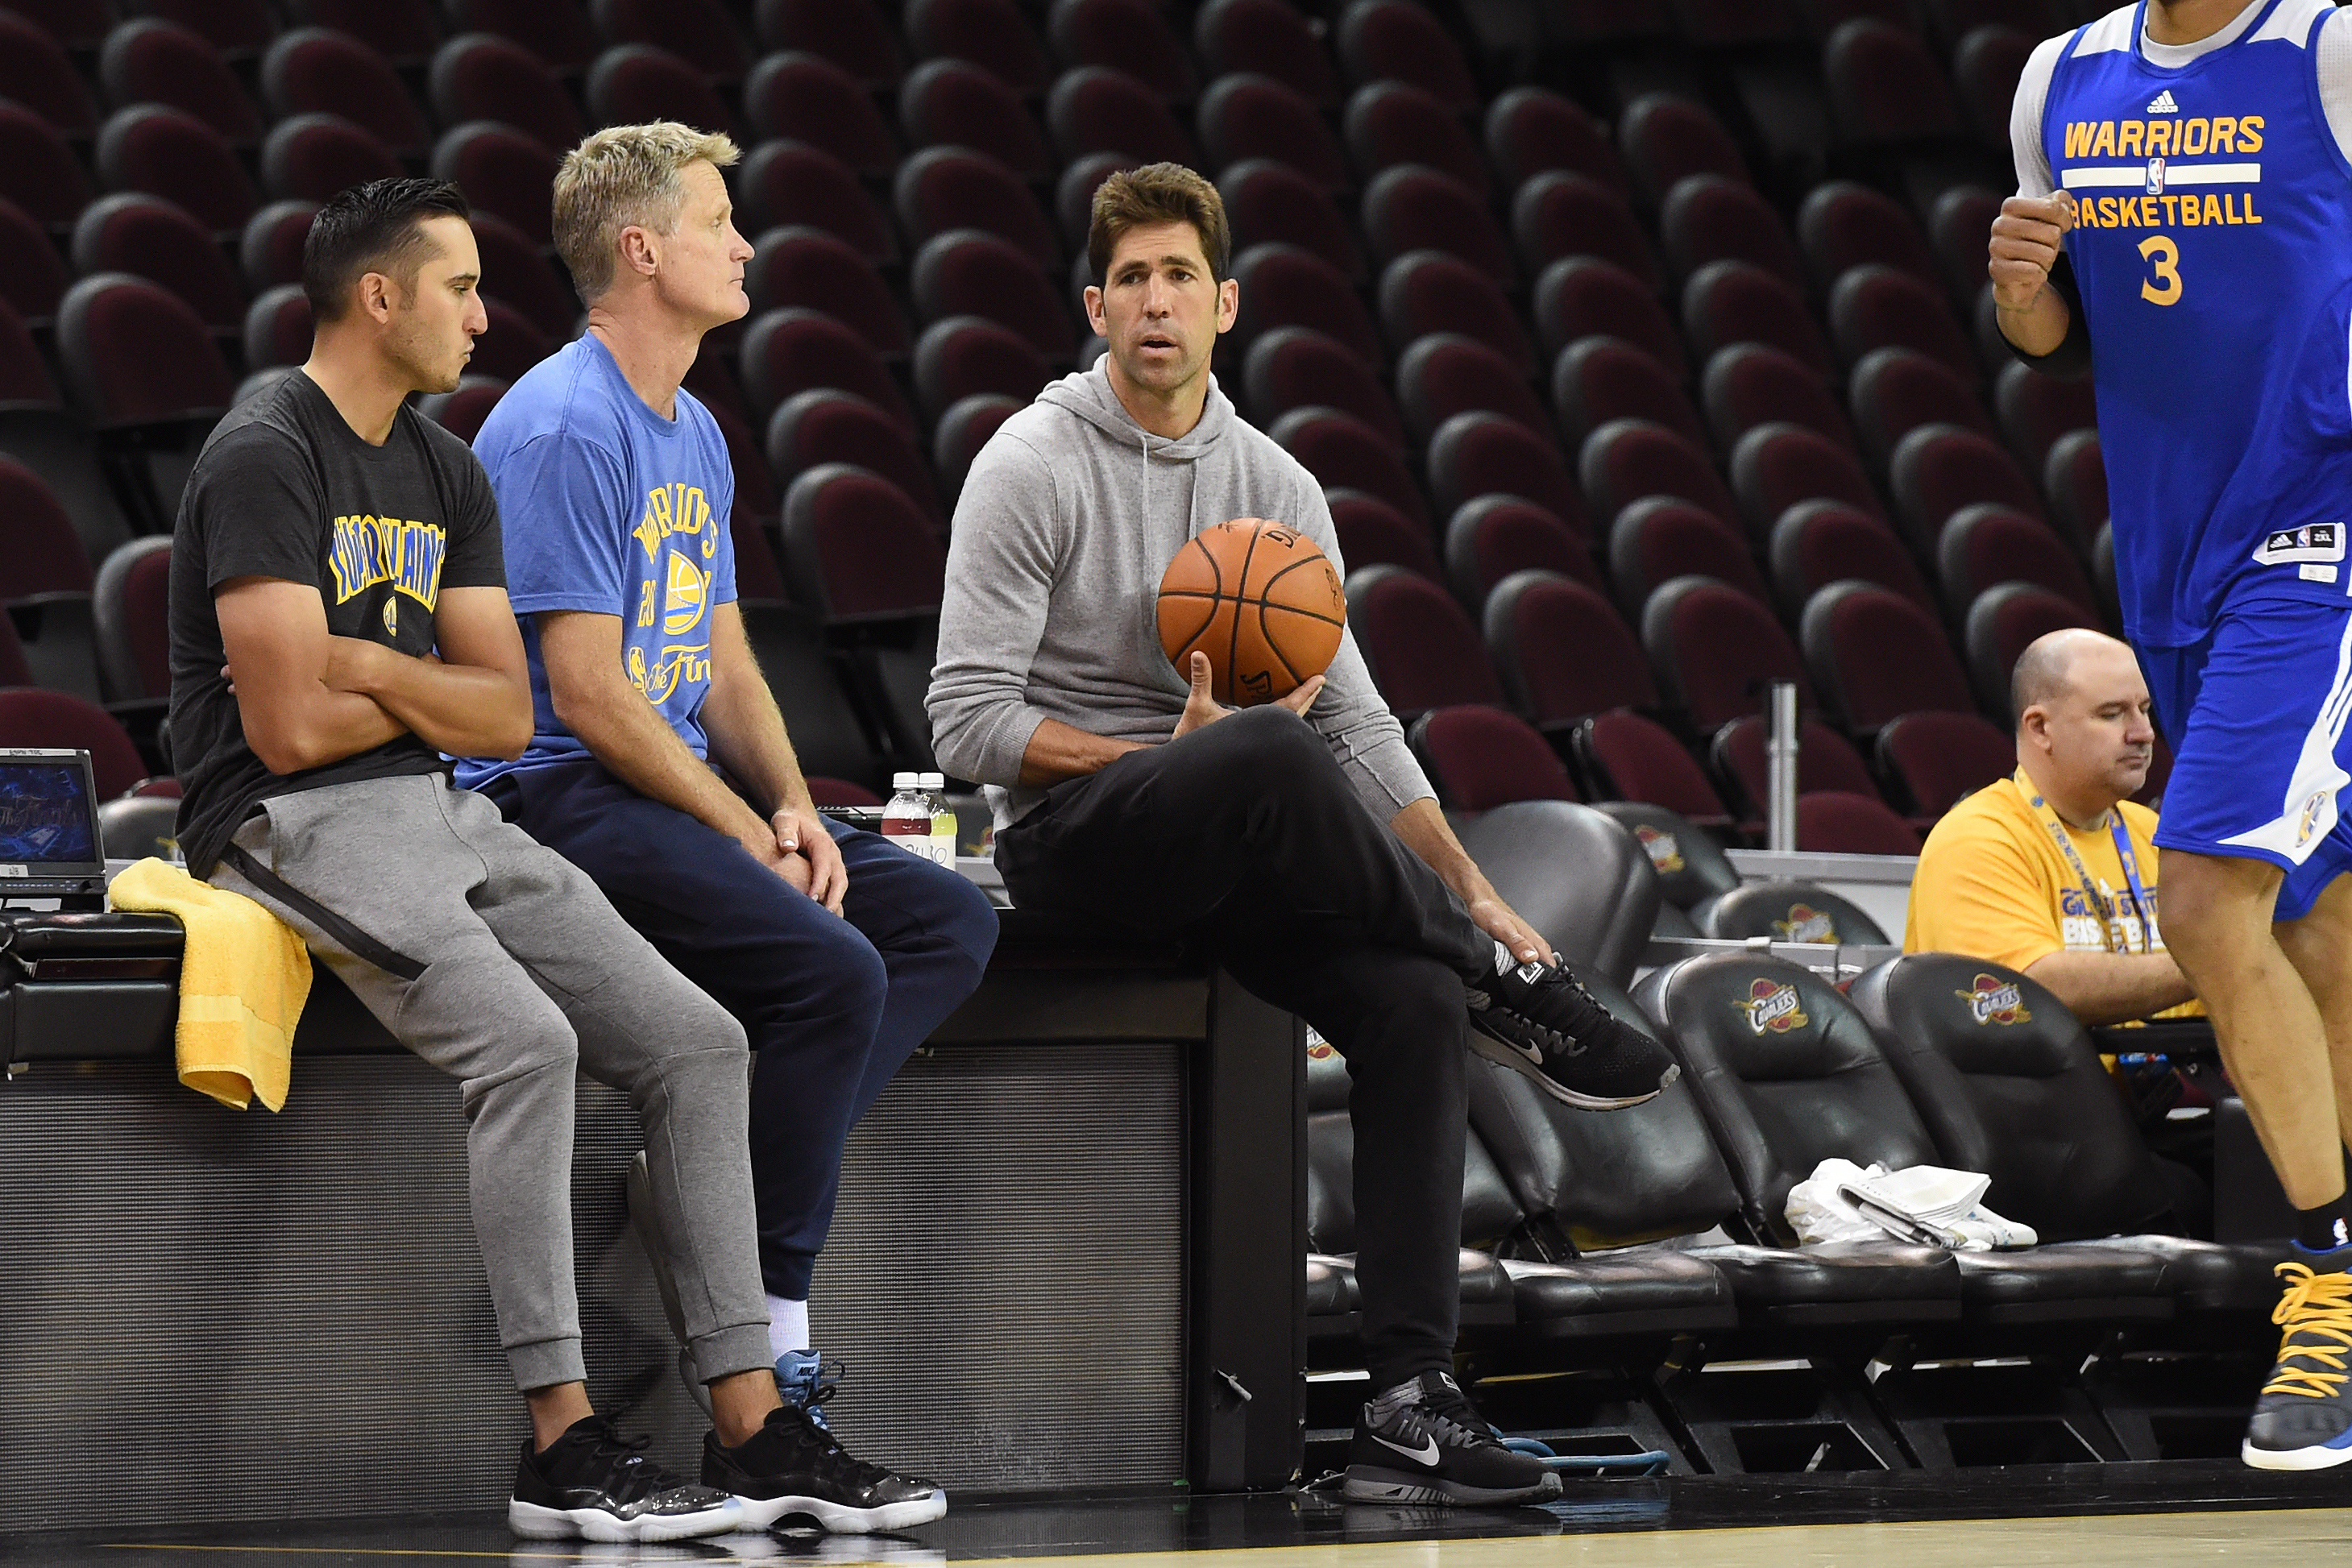 Bob Meyers of the Golden State Warriors looks on during practice and media availability as part of the 2017 NBA Finals on June 06, 2017 at Quicken Loans Arena in Cleveland, Ohio.